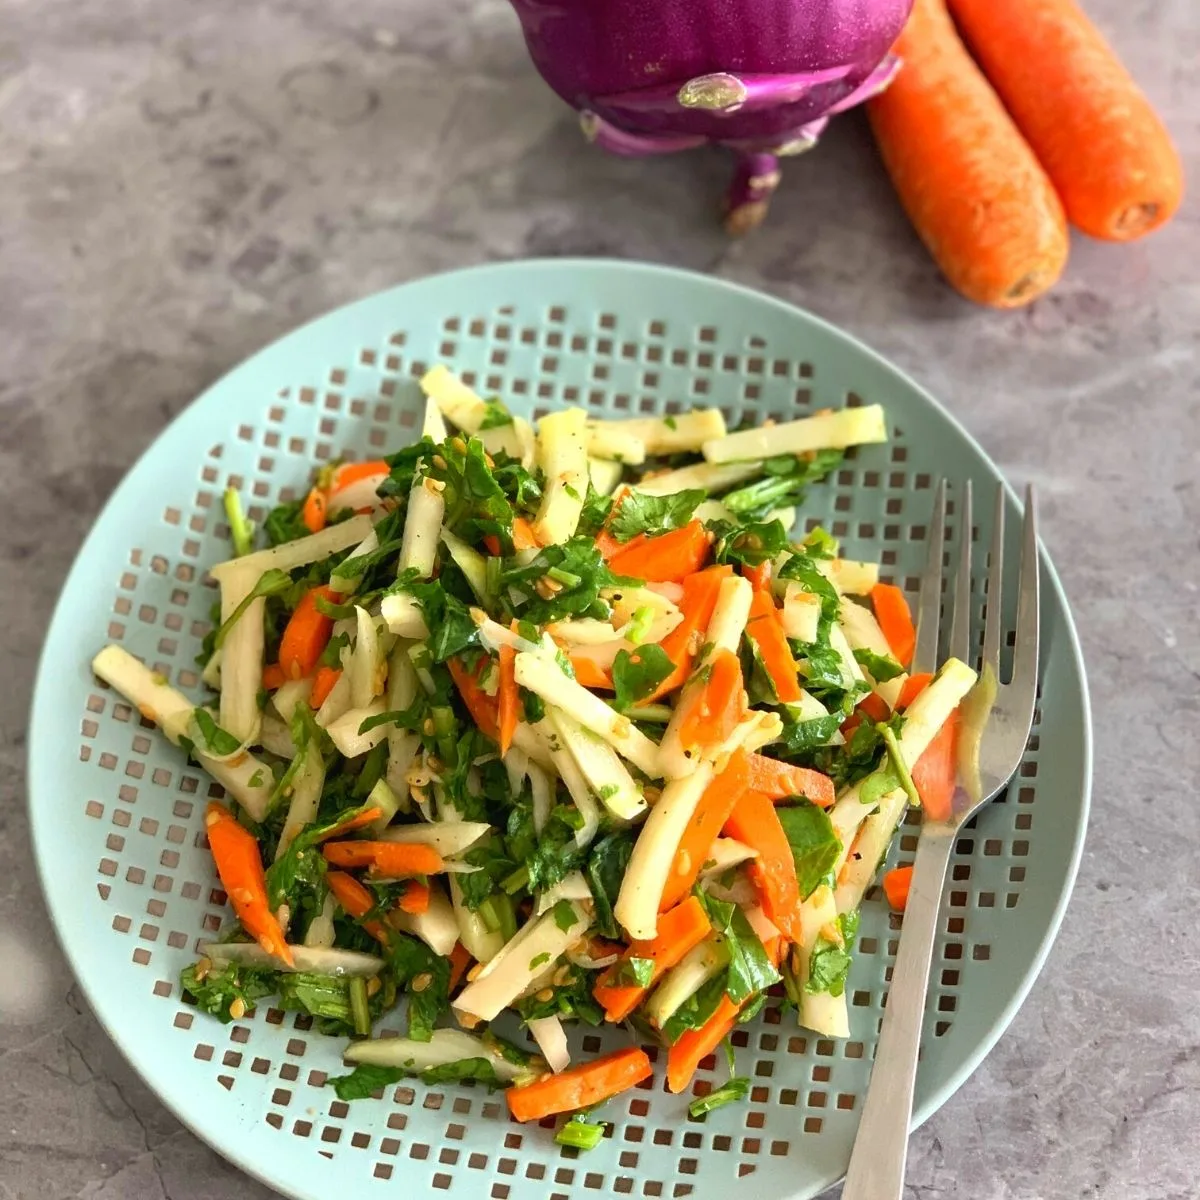 Kohlrabi, Carrot, and Spinach Salad is a quick and easy raw salad that can be made with and without oil and goes perfect as a side.